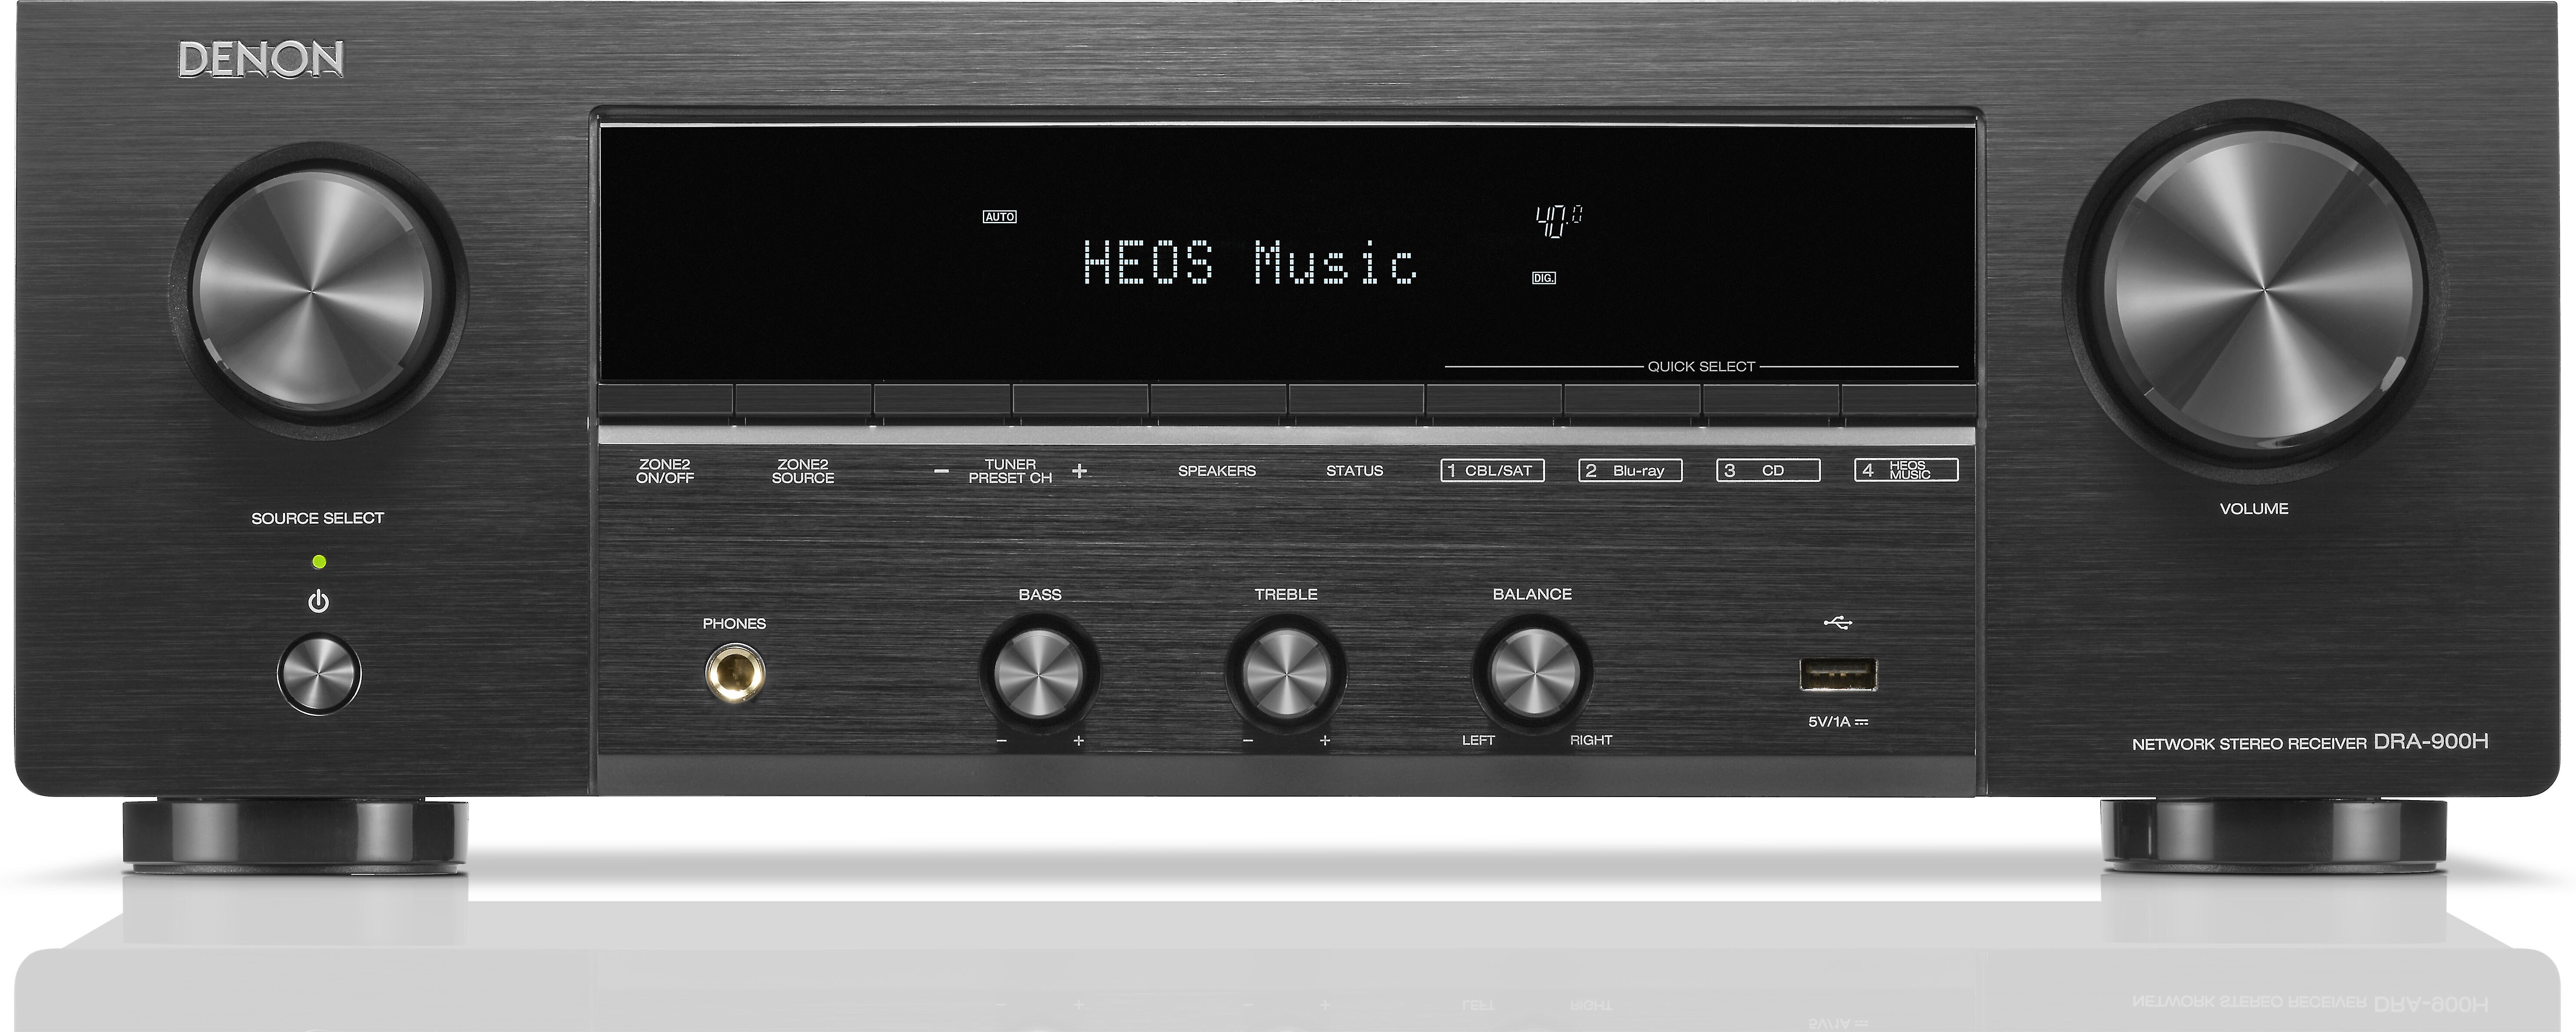 Product Videos: Built-in Crutchfield Apple receiver HEOS Stereo Bluetooth®, with 2, at built-in HDMI, Denon DRA-900H AirPlay® Wi-Fi®, and